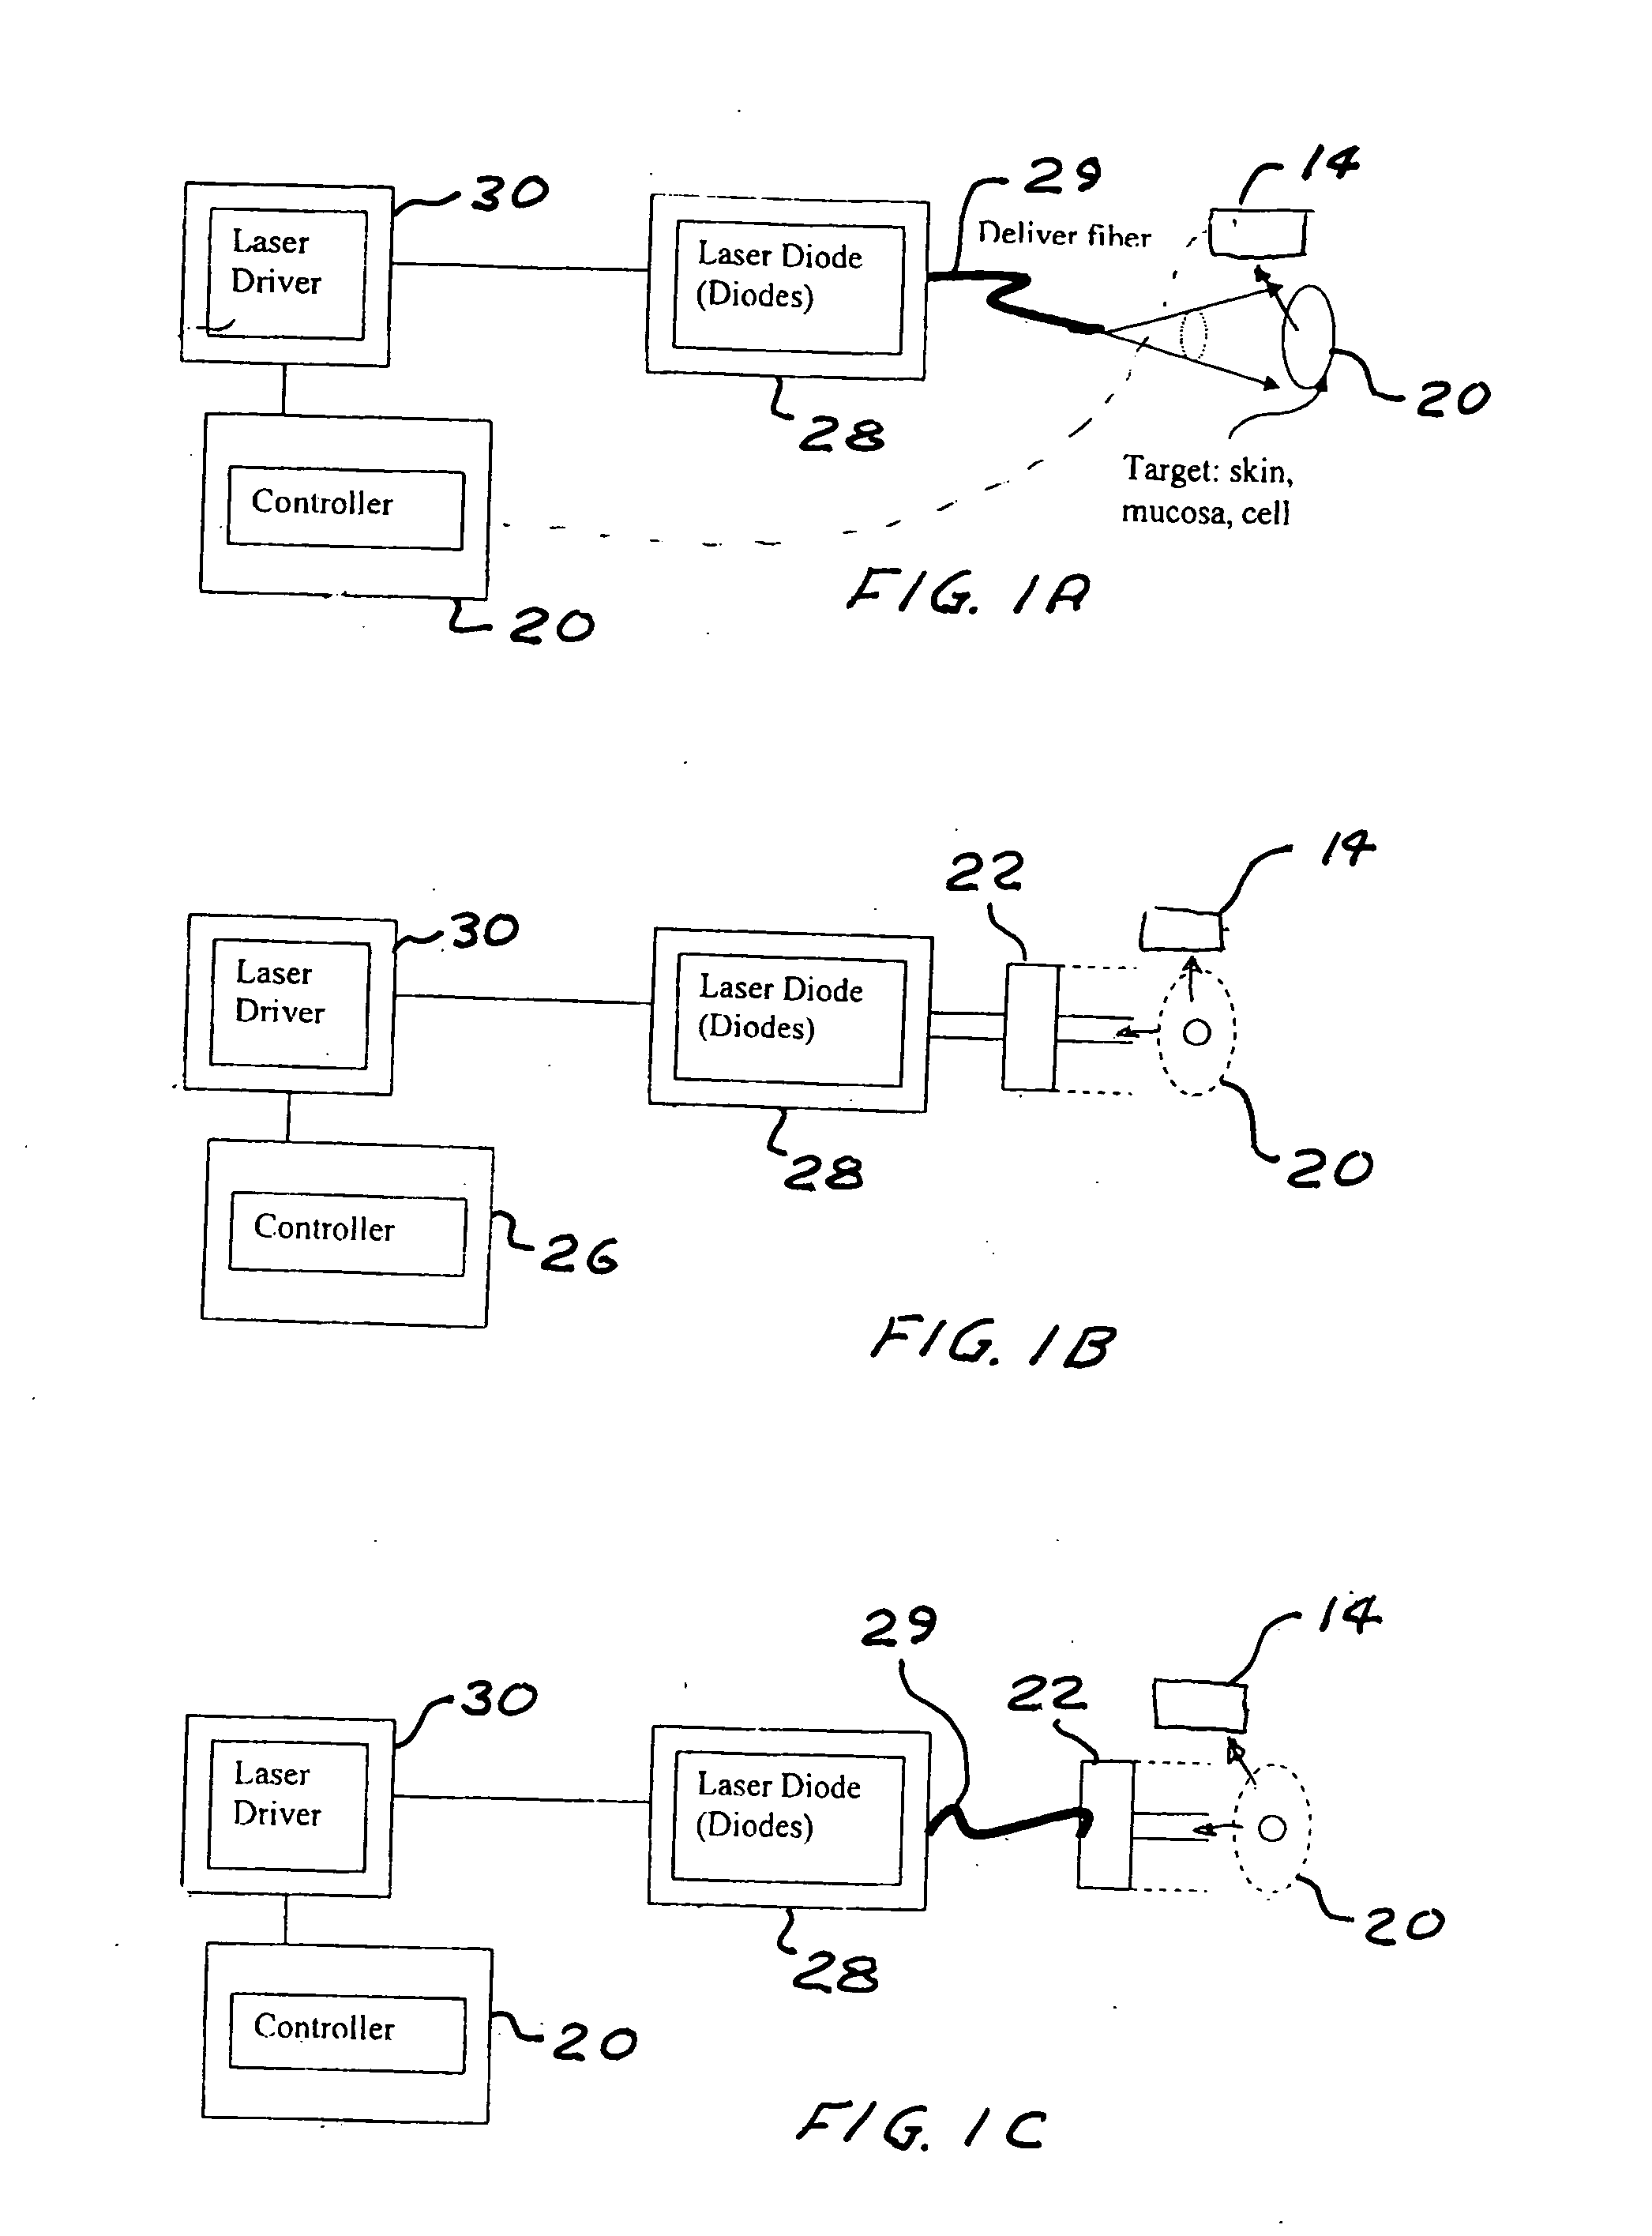 Portable laser and process for producing controlled pain